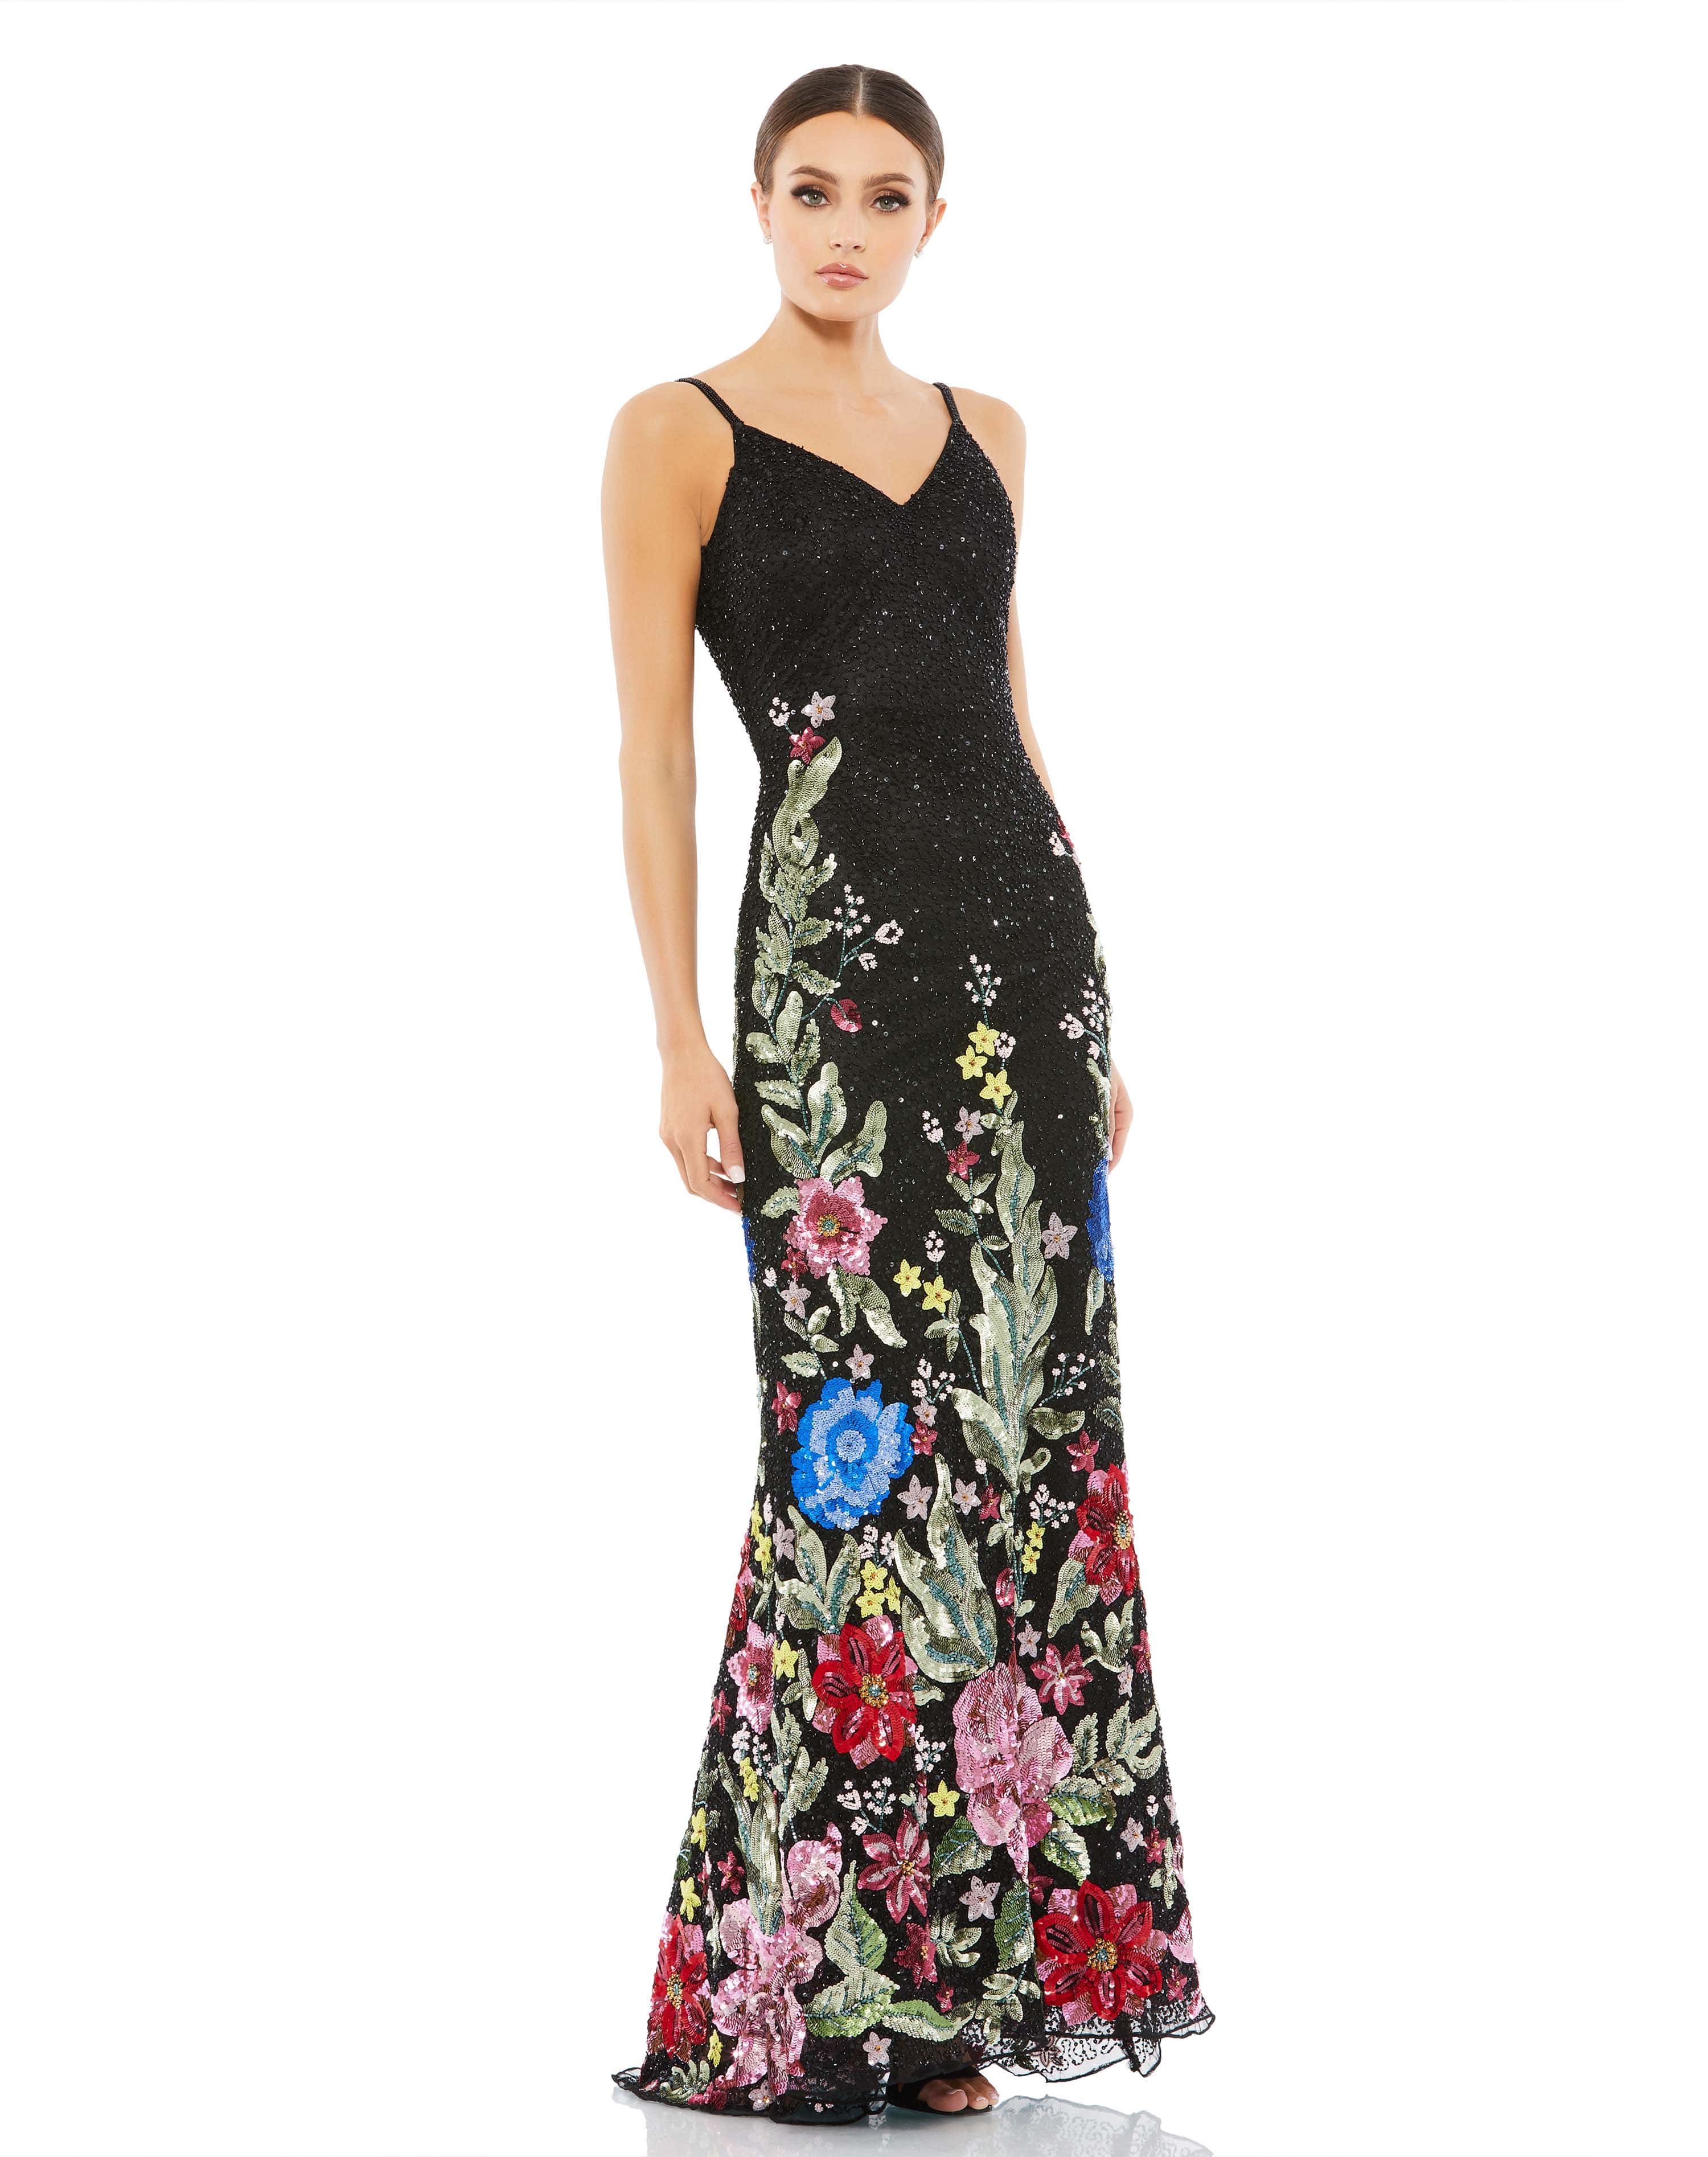 Floral Embellished Spaghetti Strap Gown – Mac Duggal